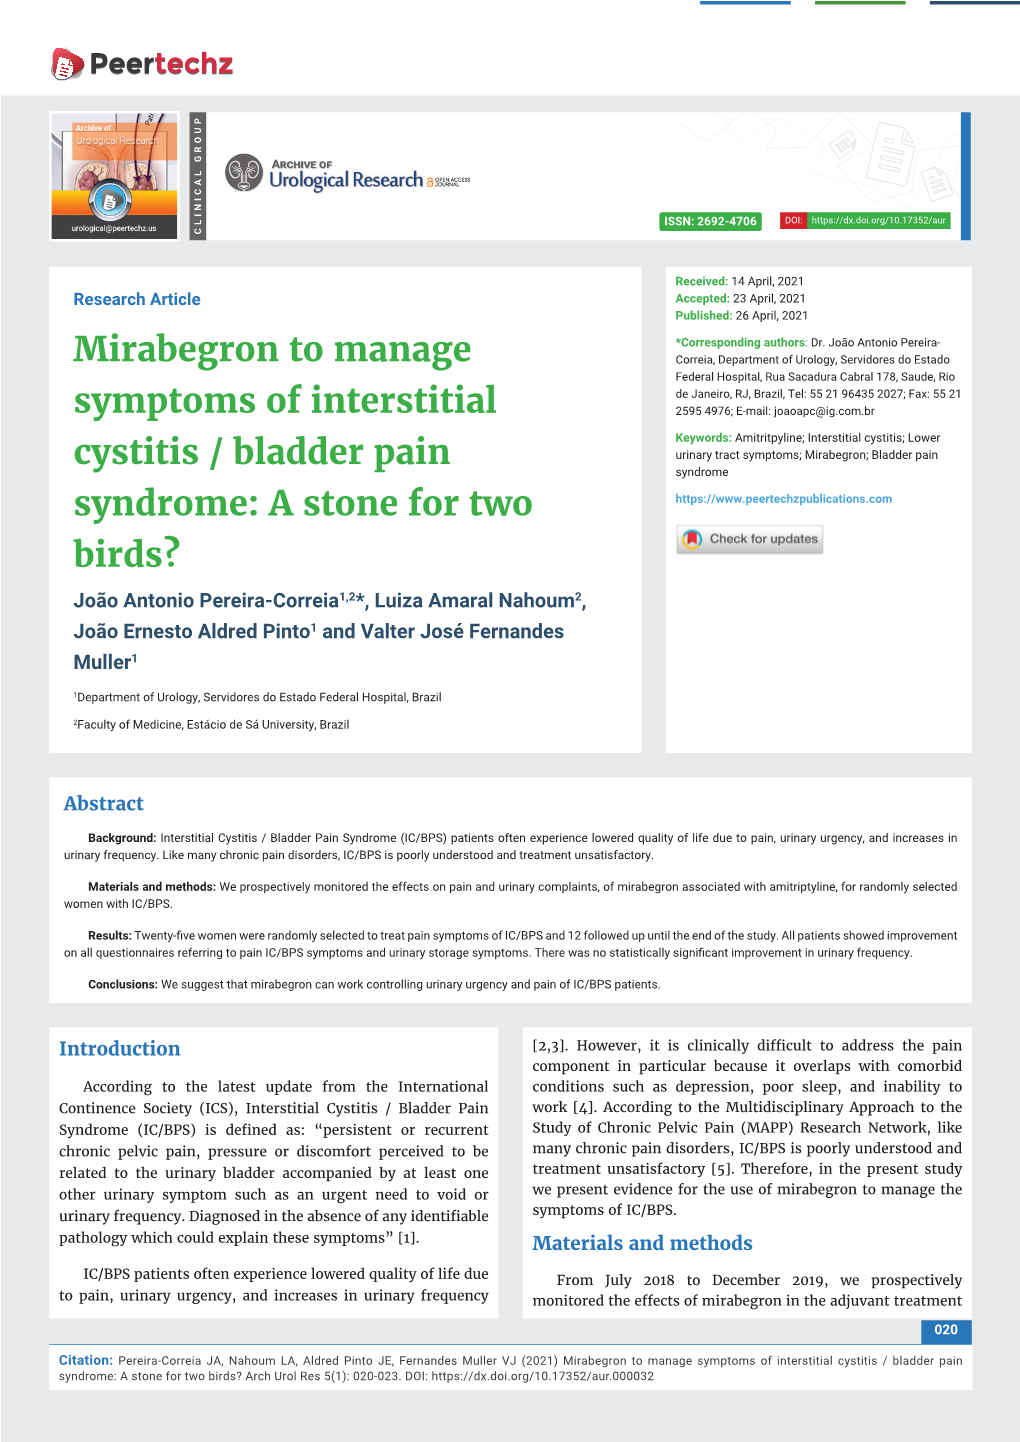 Mirabegron to Manage Symptoms of Interstitial Cystitis / Bladder Pain Syndrome: a Stone for Two Birds? Arch Urol Res 5(1): 020-023